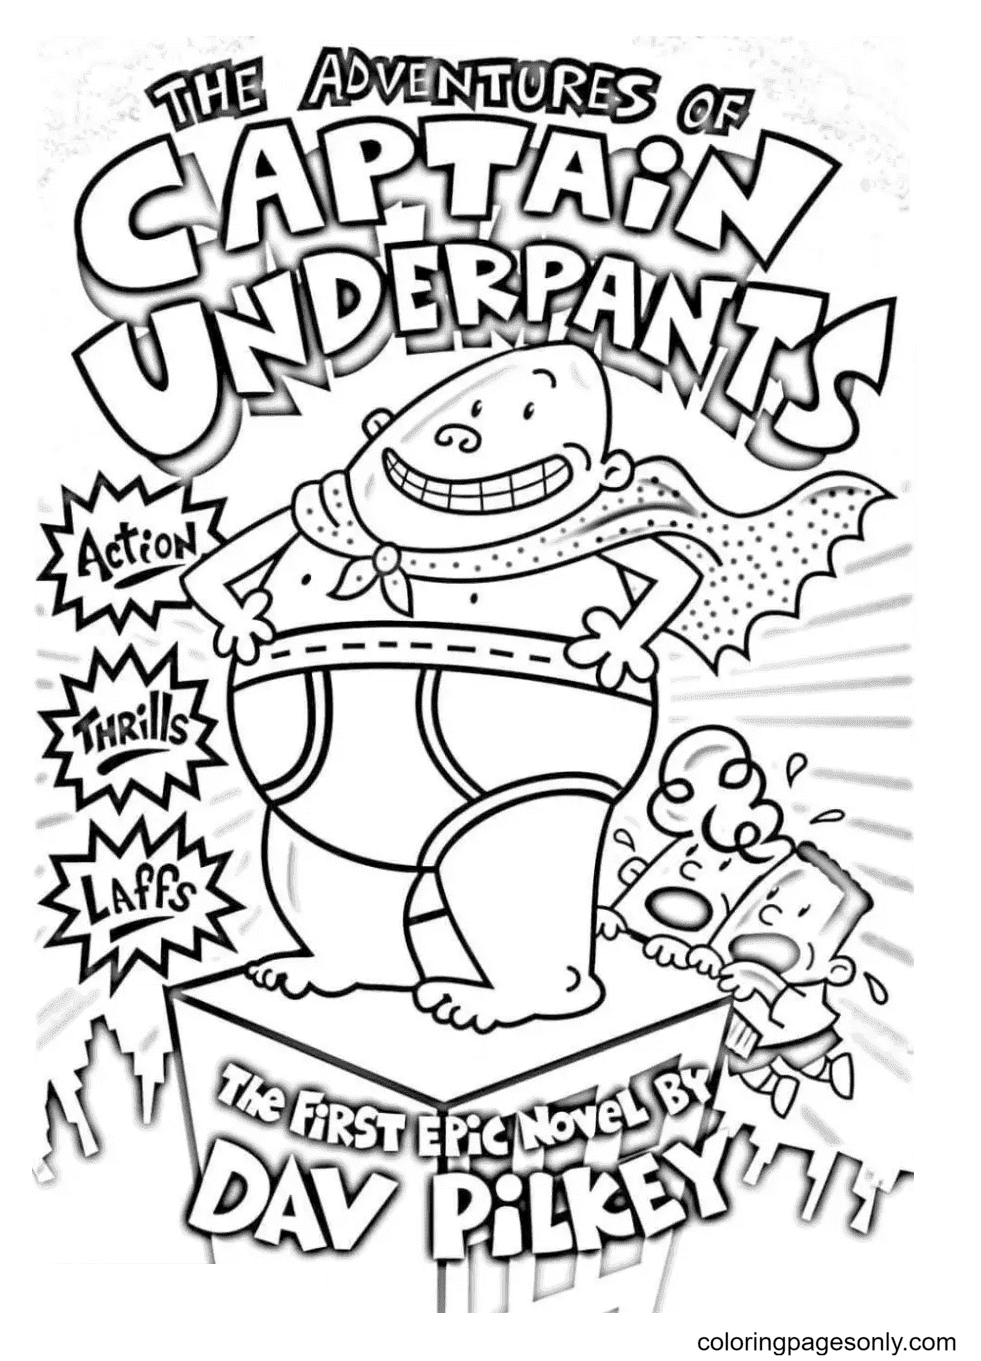 Captain Underpants with George Beard and Harold Hutchins from Captain Underpants